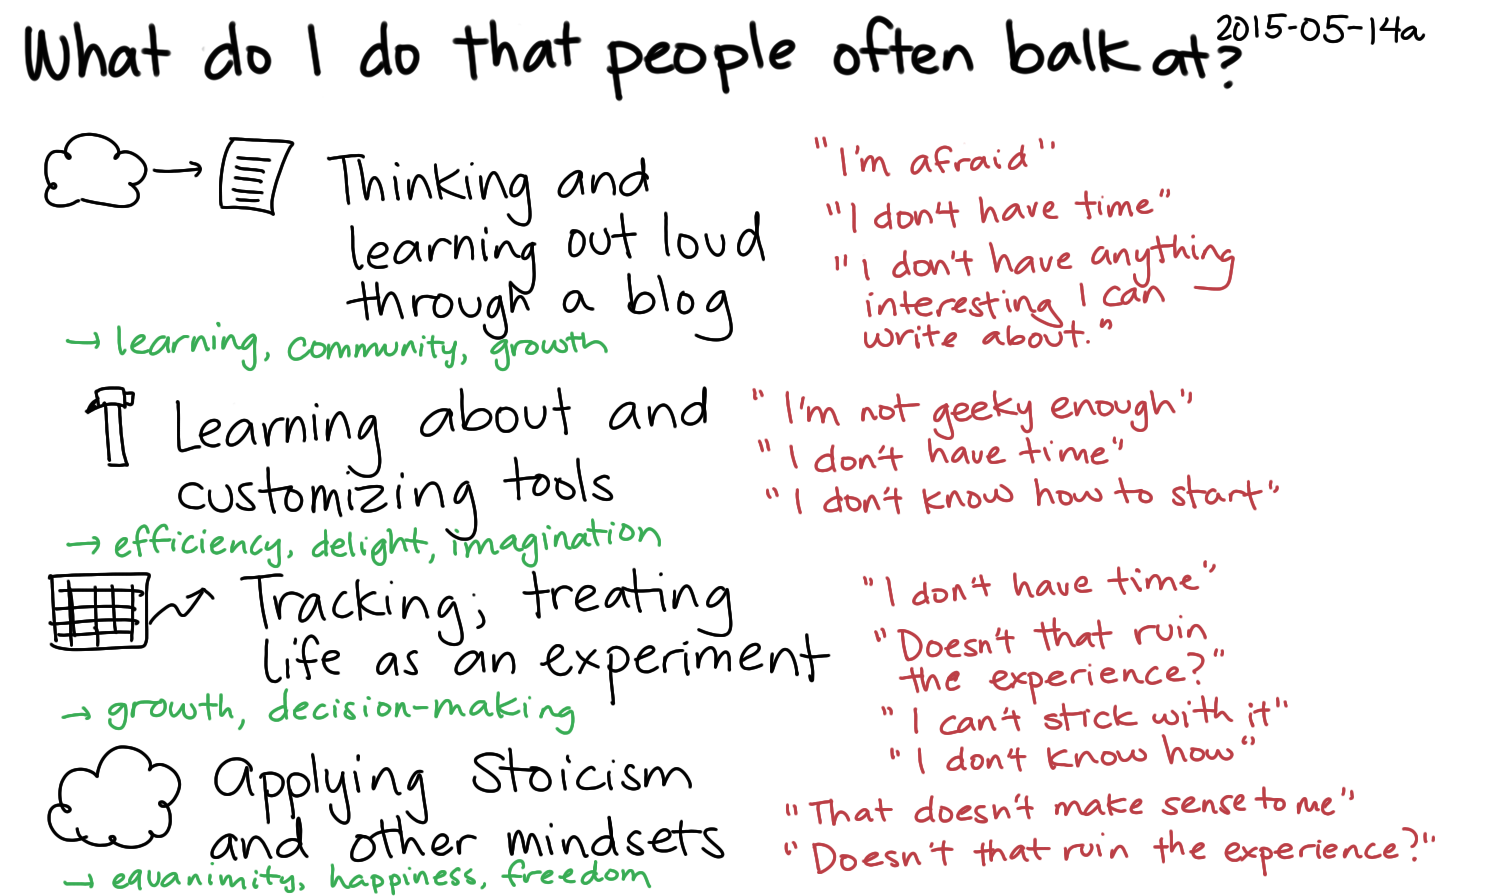 2015-05-14a What do I do that people often balk at -- index card #advice #yeahbut #different.png